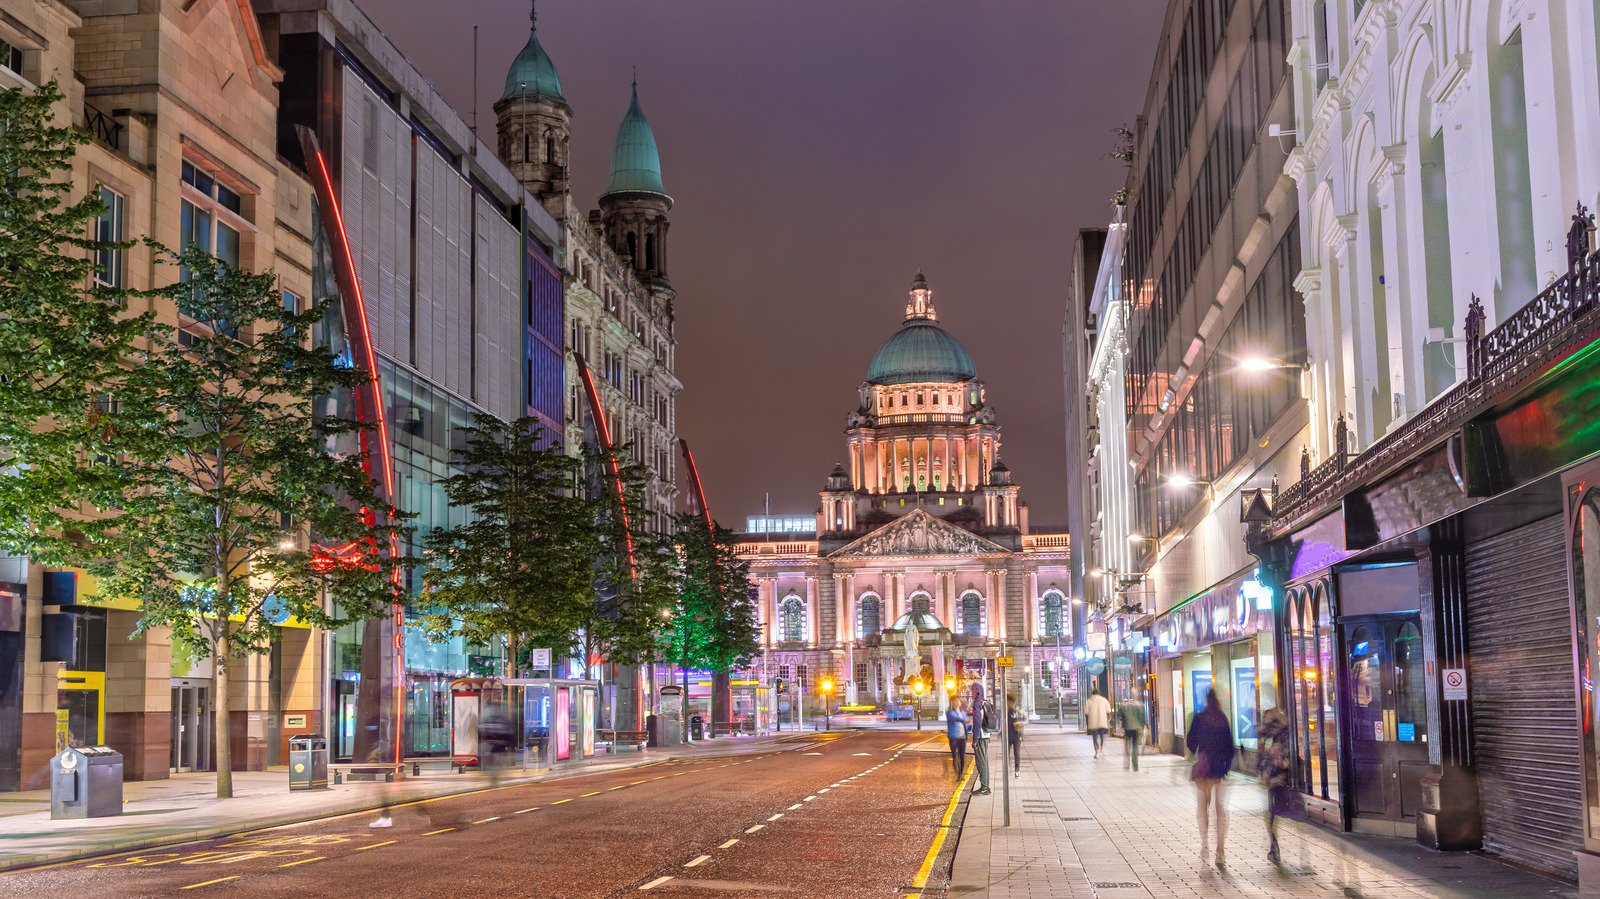 If You Want To Learn More About Belfast's History, This Unique Tour Is For You